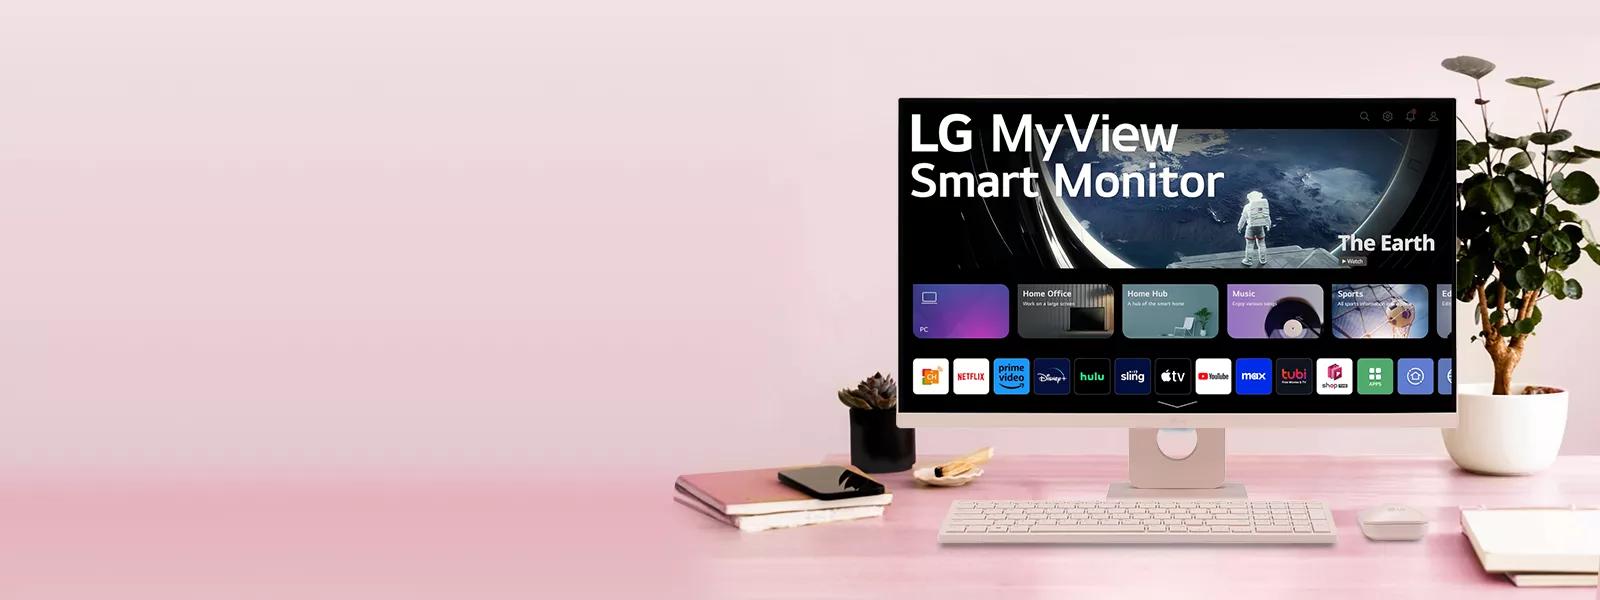 Whether you’re catching up on work or winding down with your favorite content — bring some flair to your desktop with the style and functionality of a pink MyView monitor, pink wireless keyboard and pink wireless mouse.